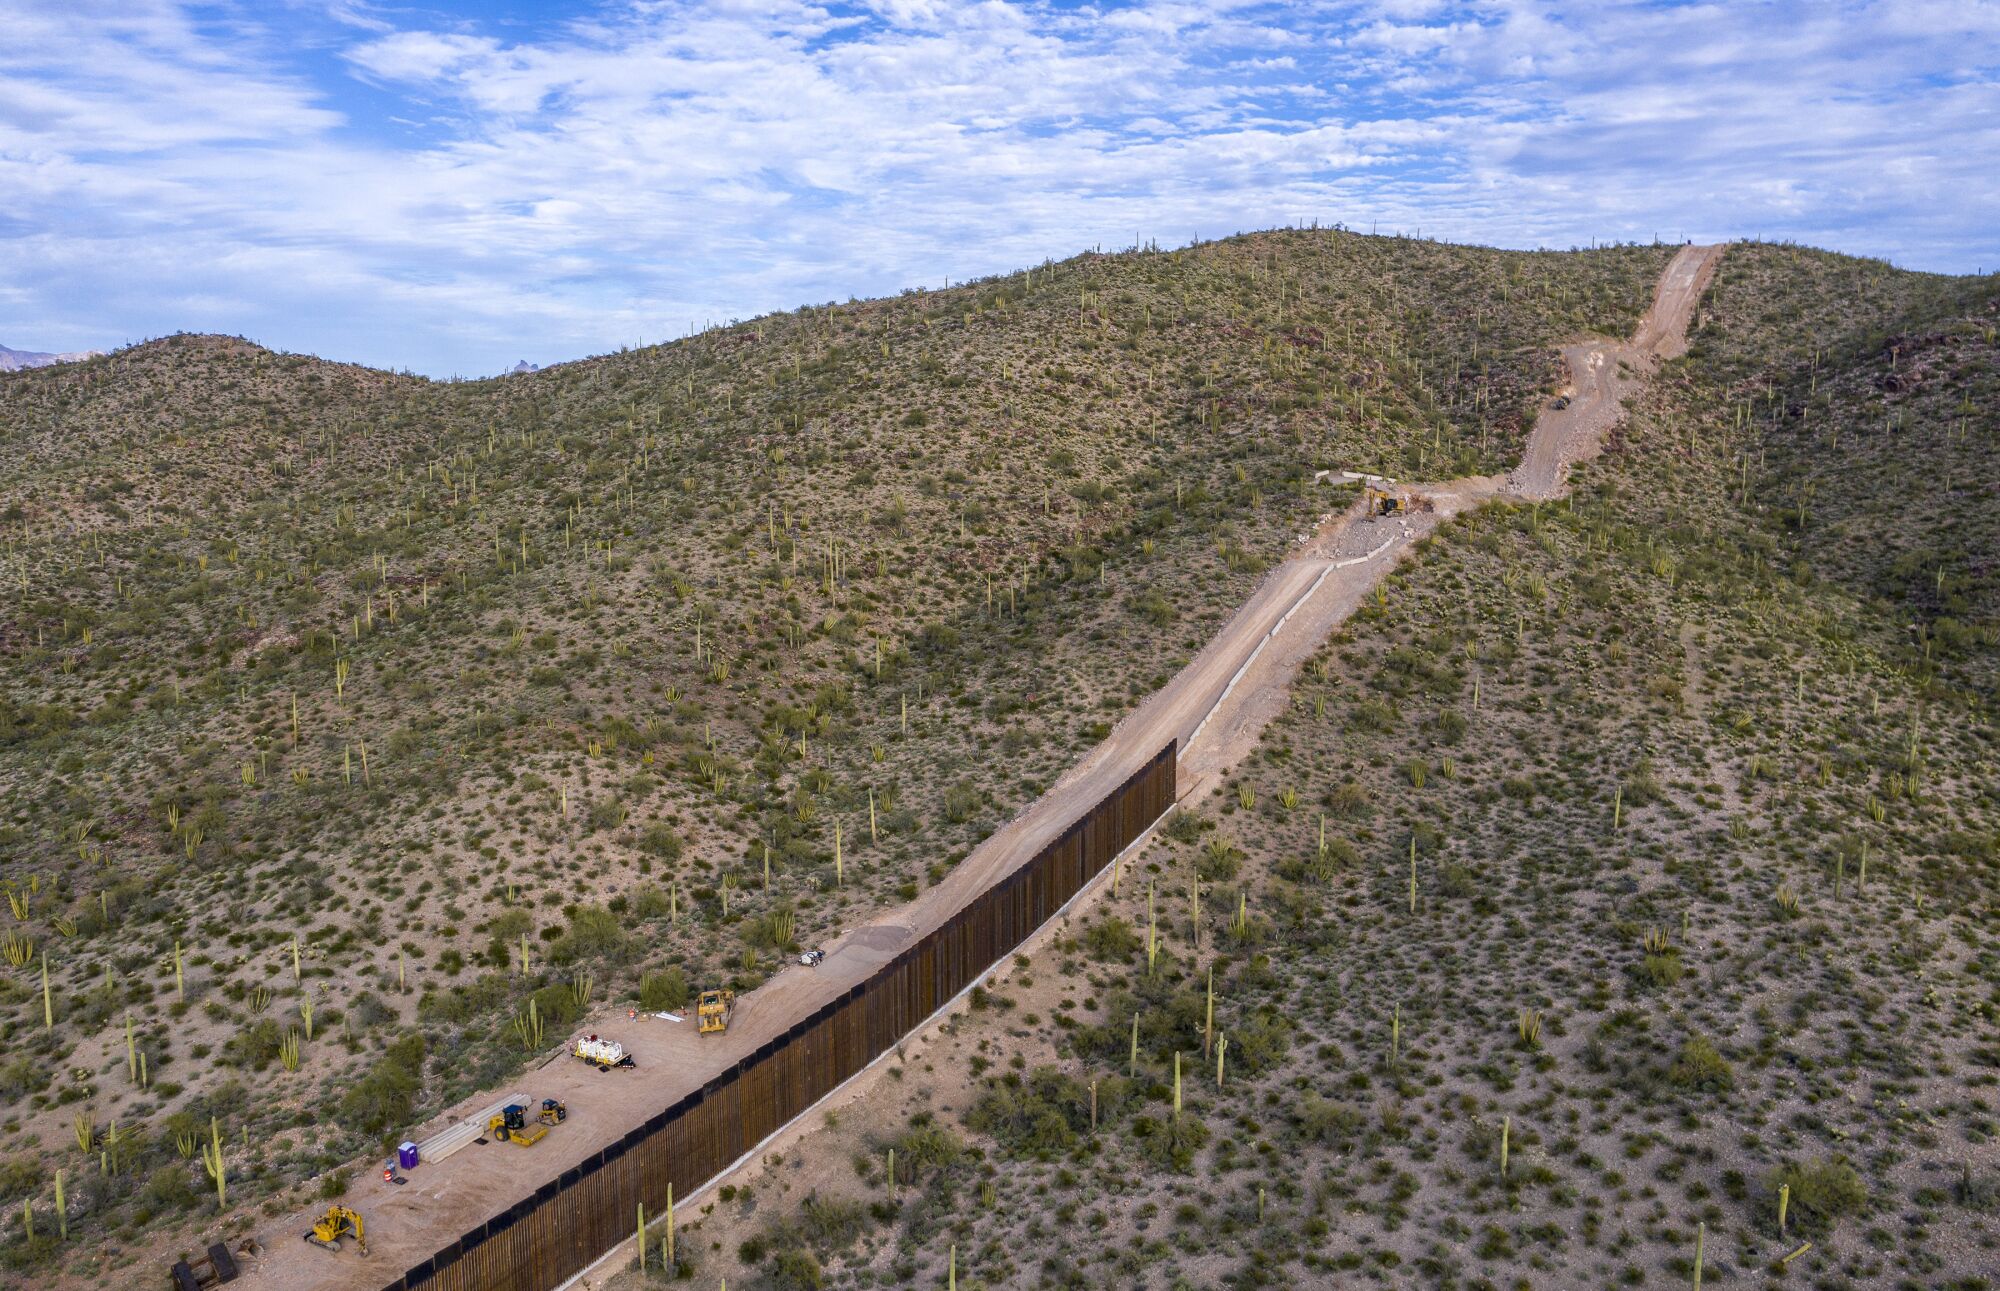 Border fence construction is underway in Arizona, blasting through sites like Monument Hill.